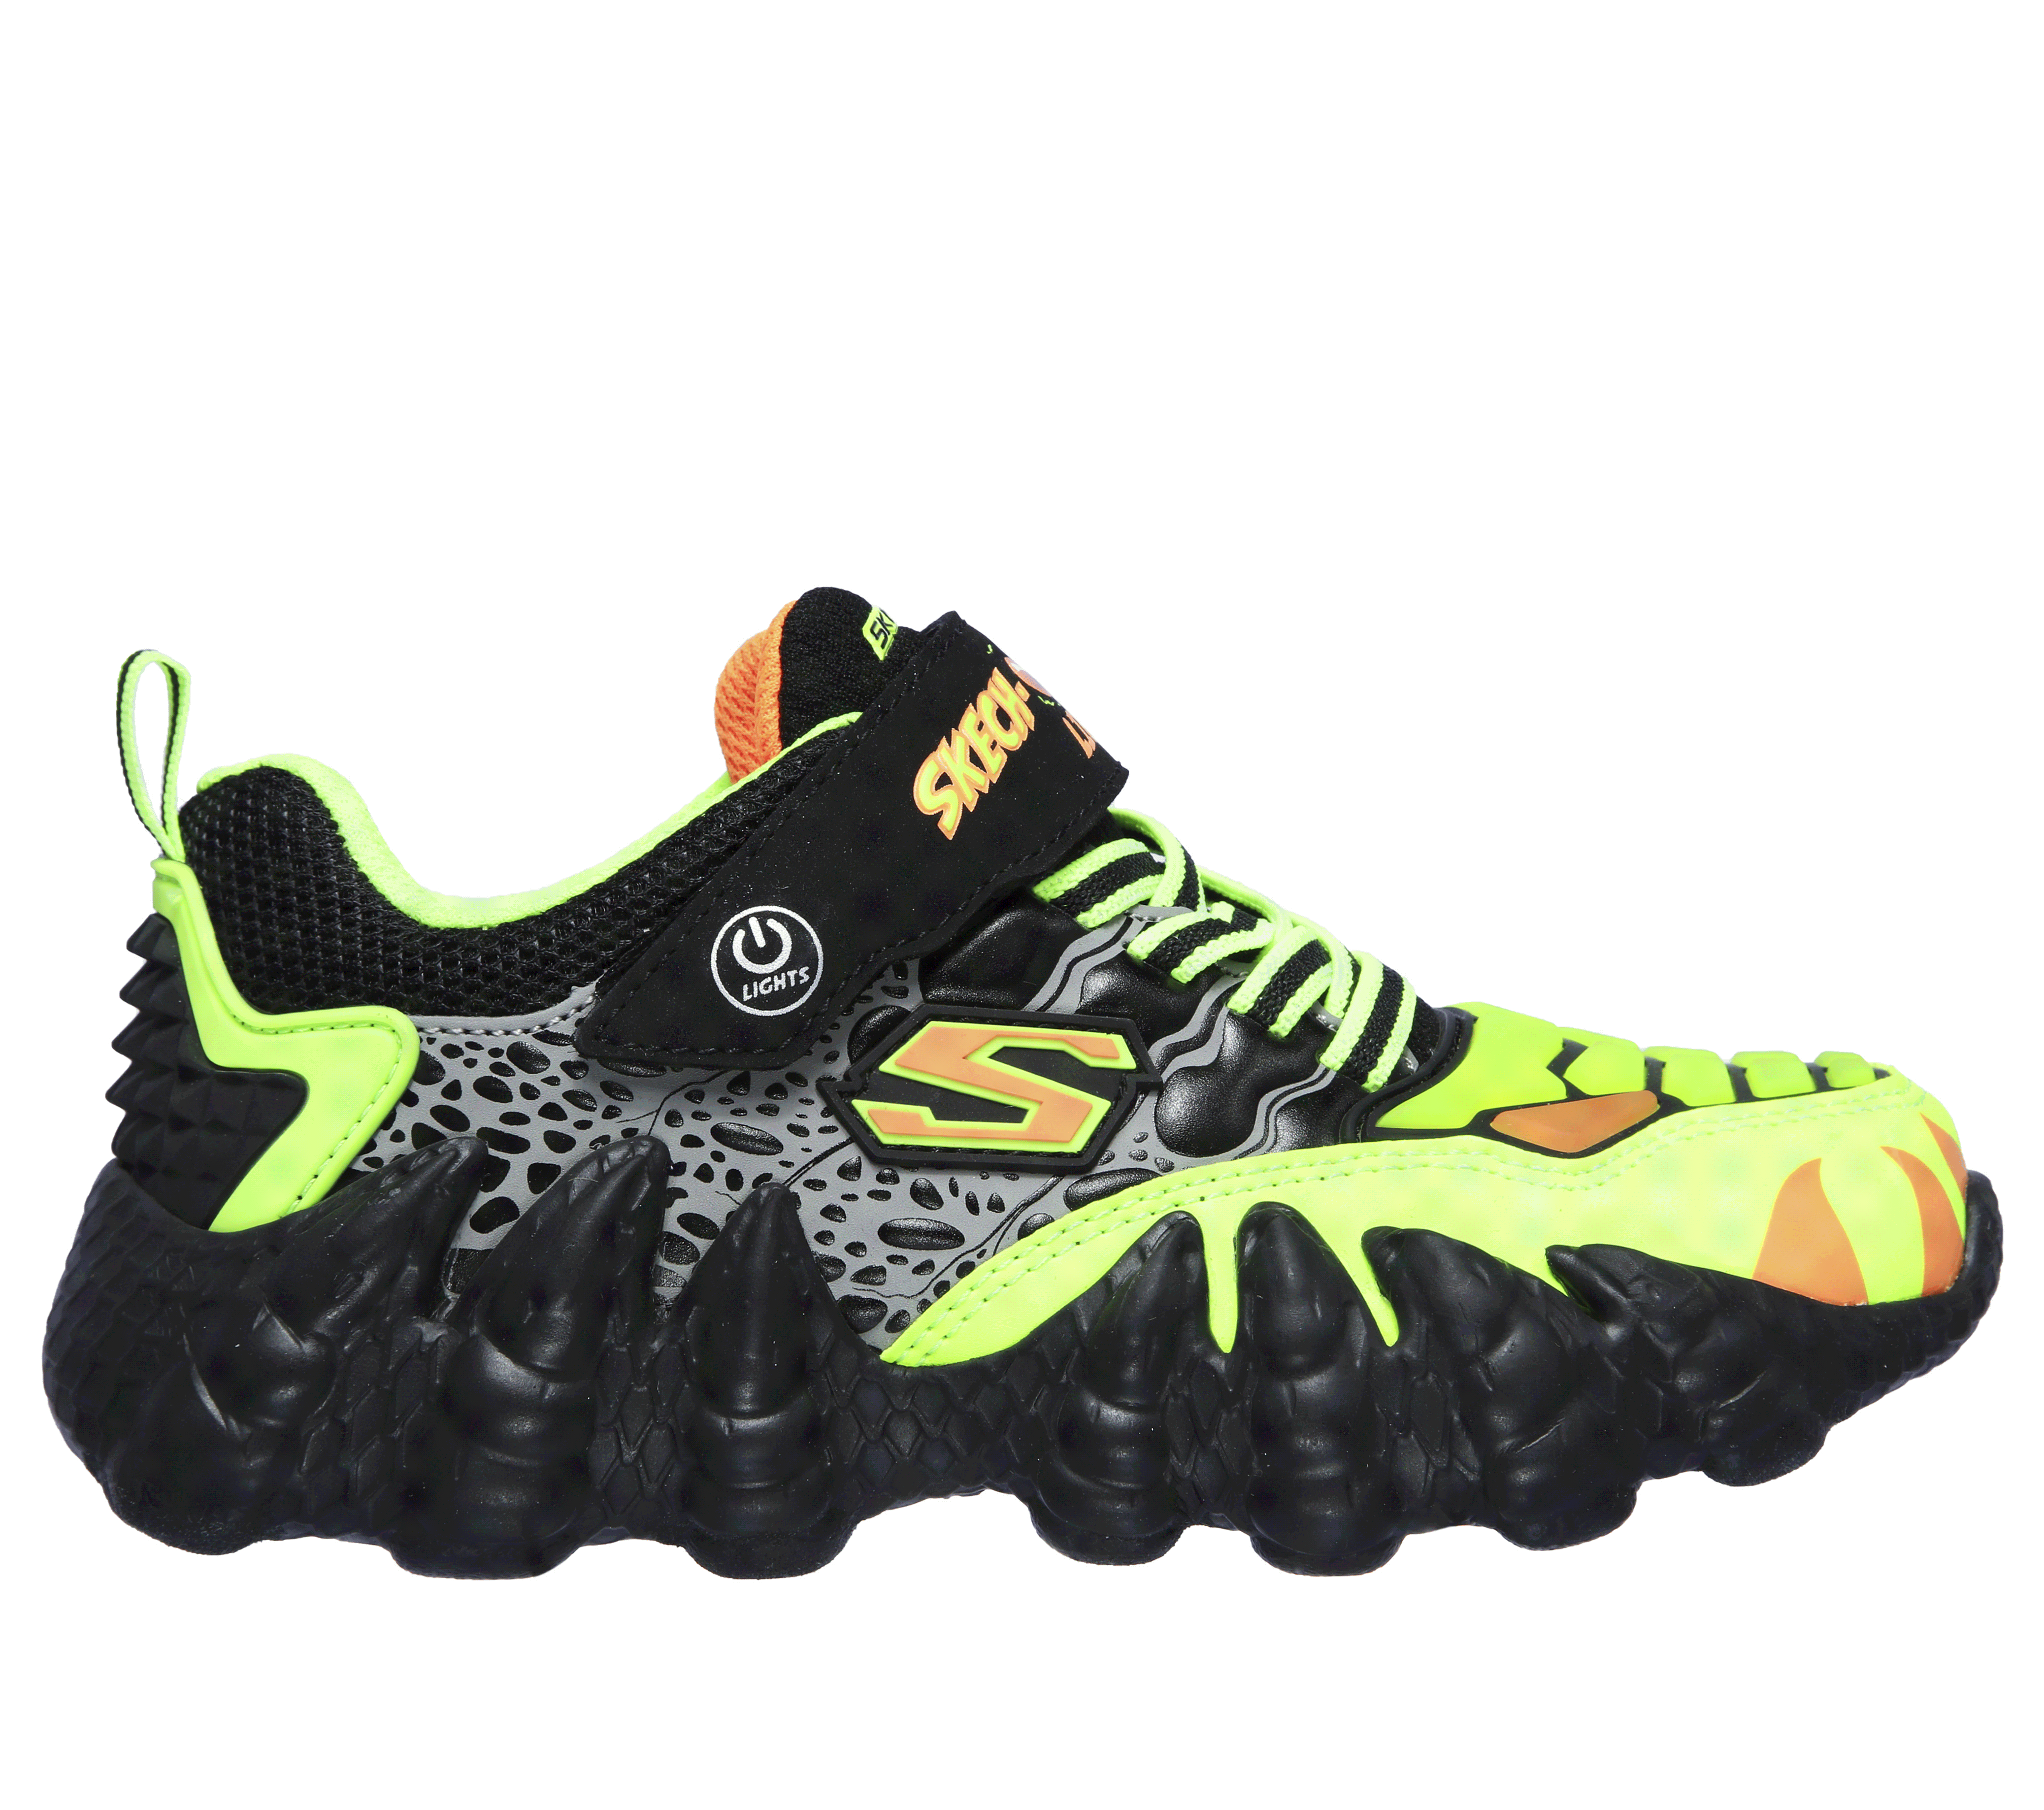 skechers led shoes canada